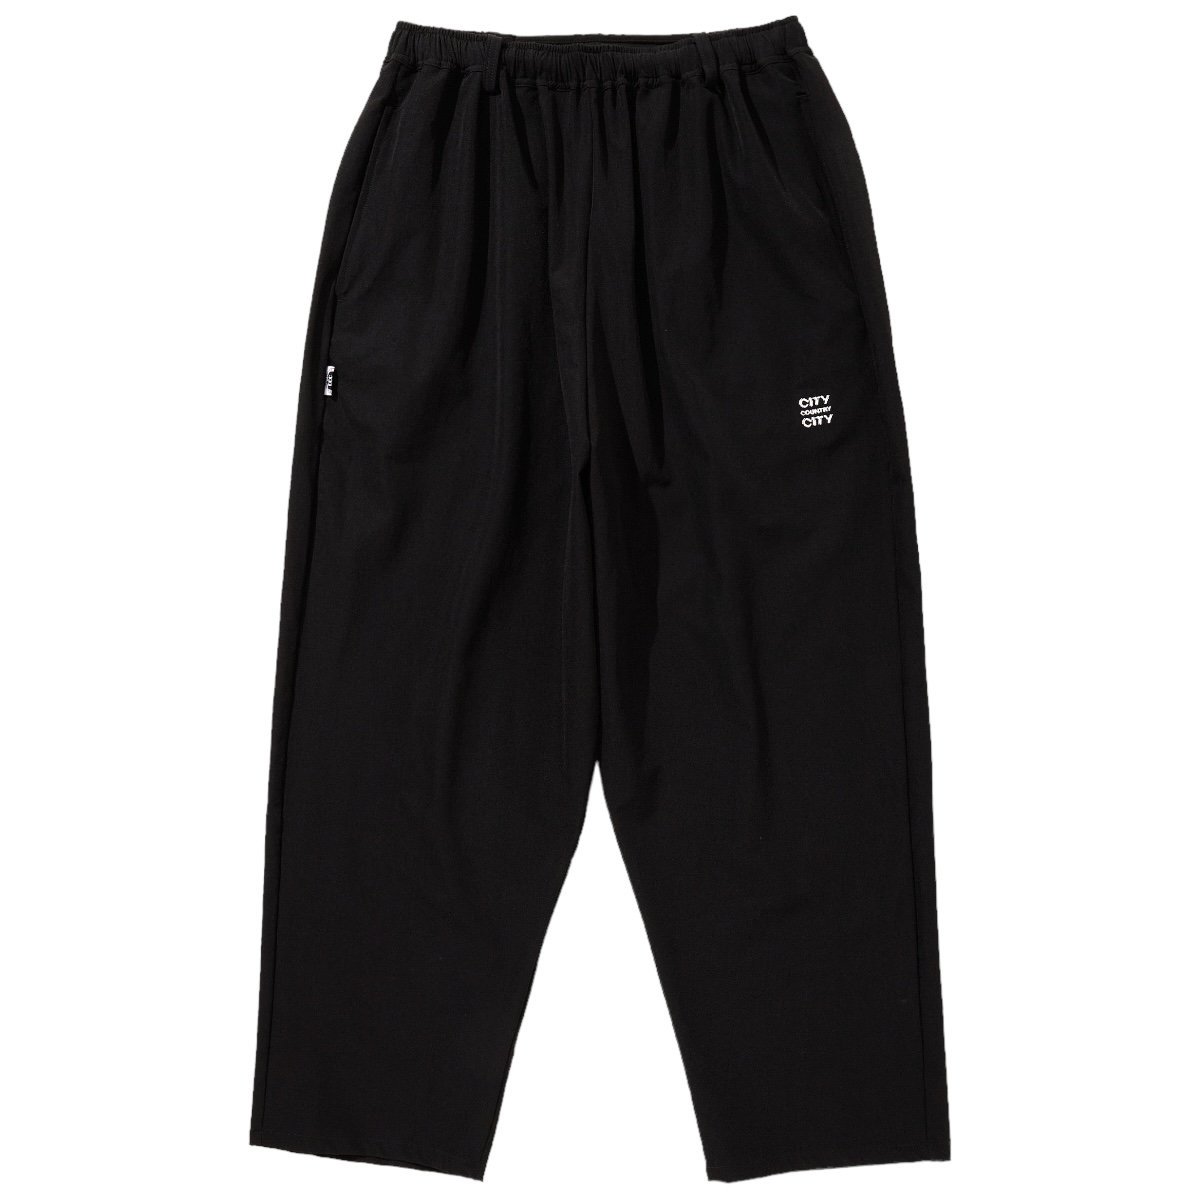 CITY COUNTRY CITY<BR>EMBROIDERED LOGO STRETCH EASY PANTS(BLACK)